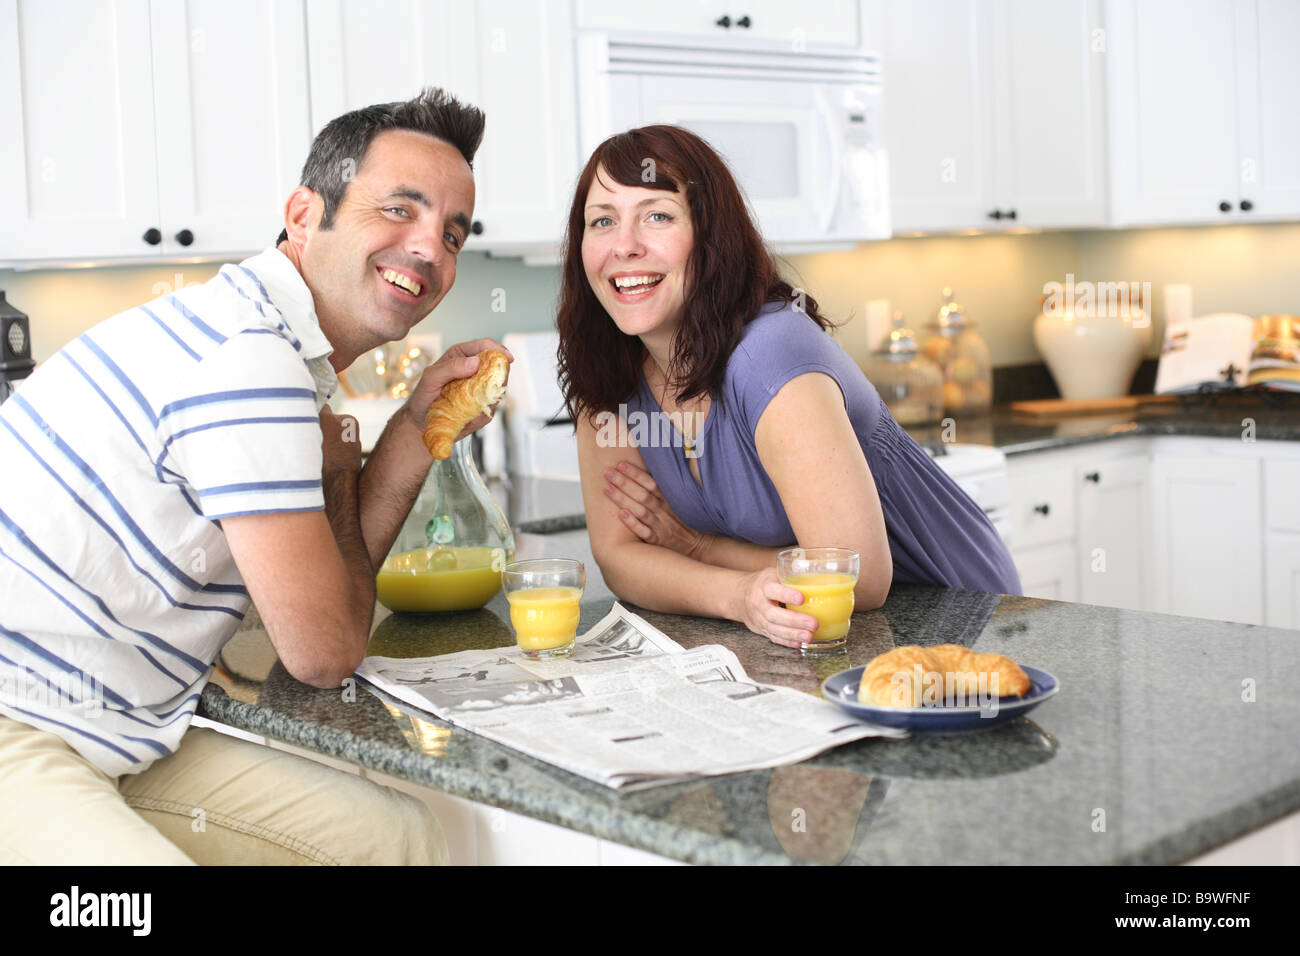 Couple having breakfast in kitchen Banque D'Images